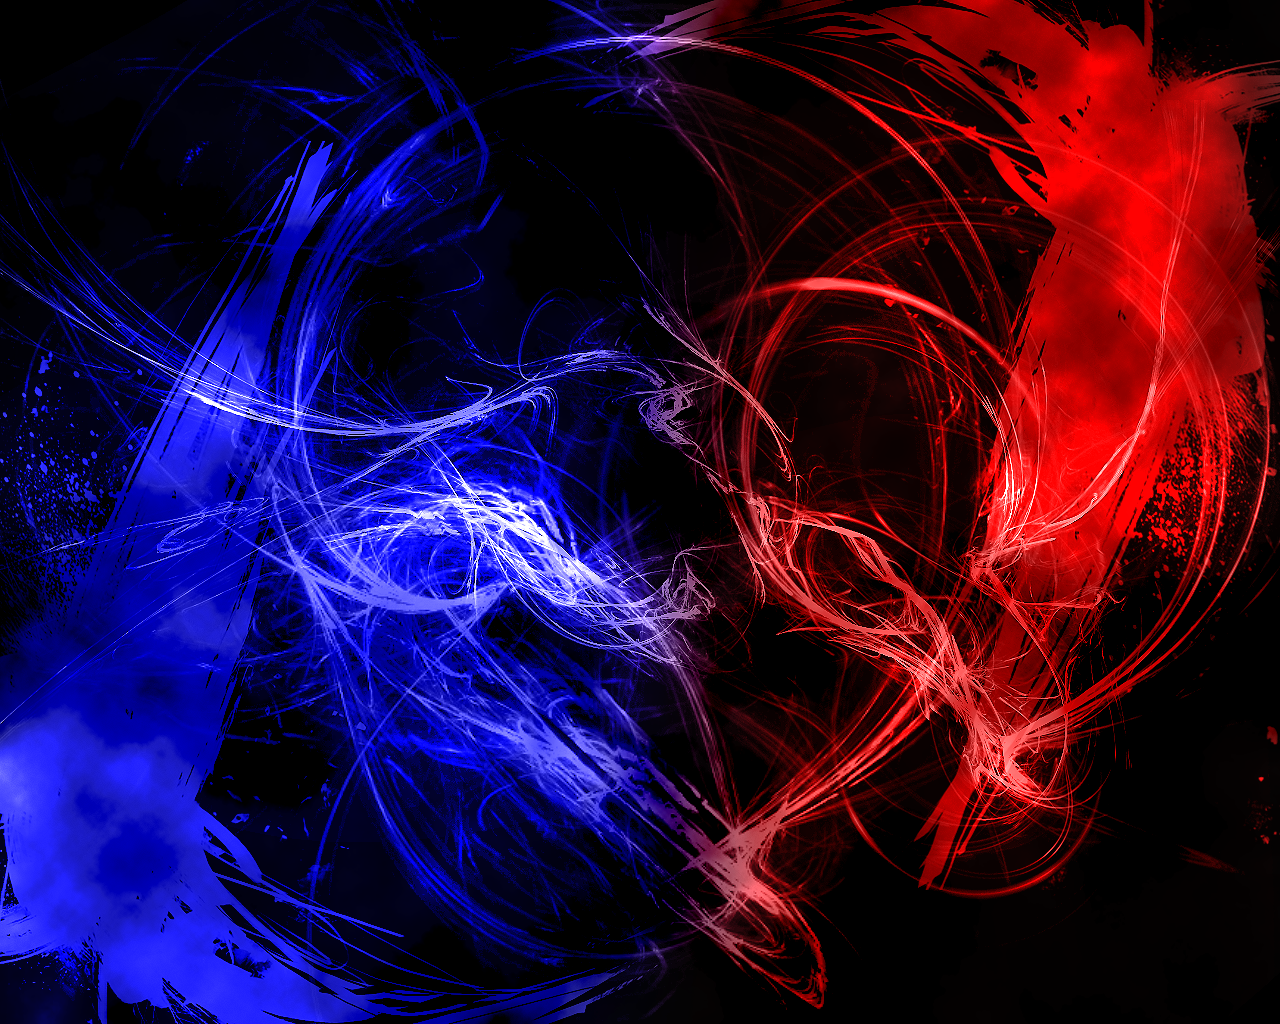 Blue And Red Abstract Art Vs Wallpaper